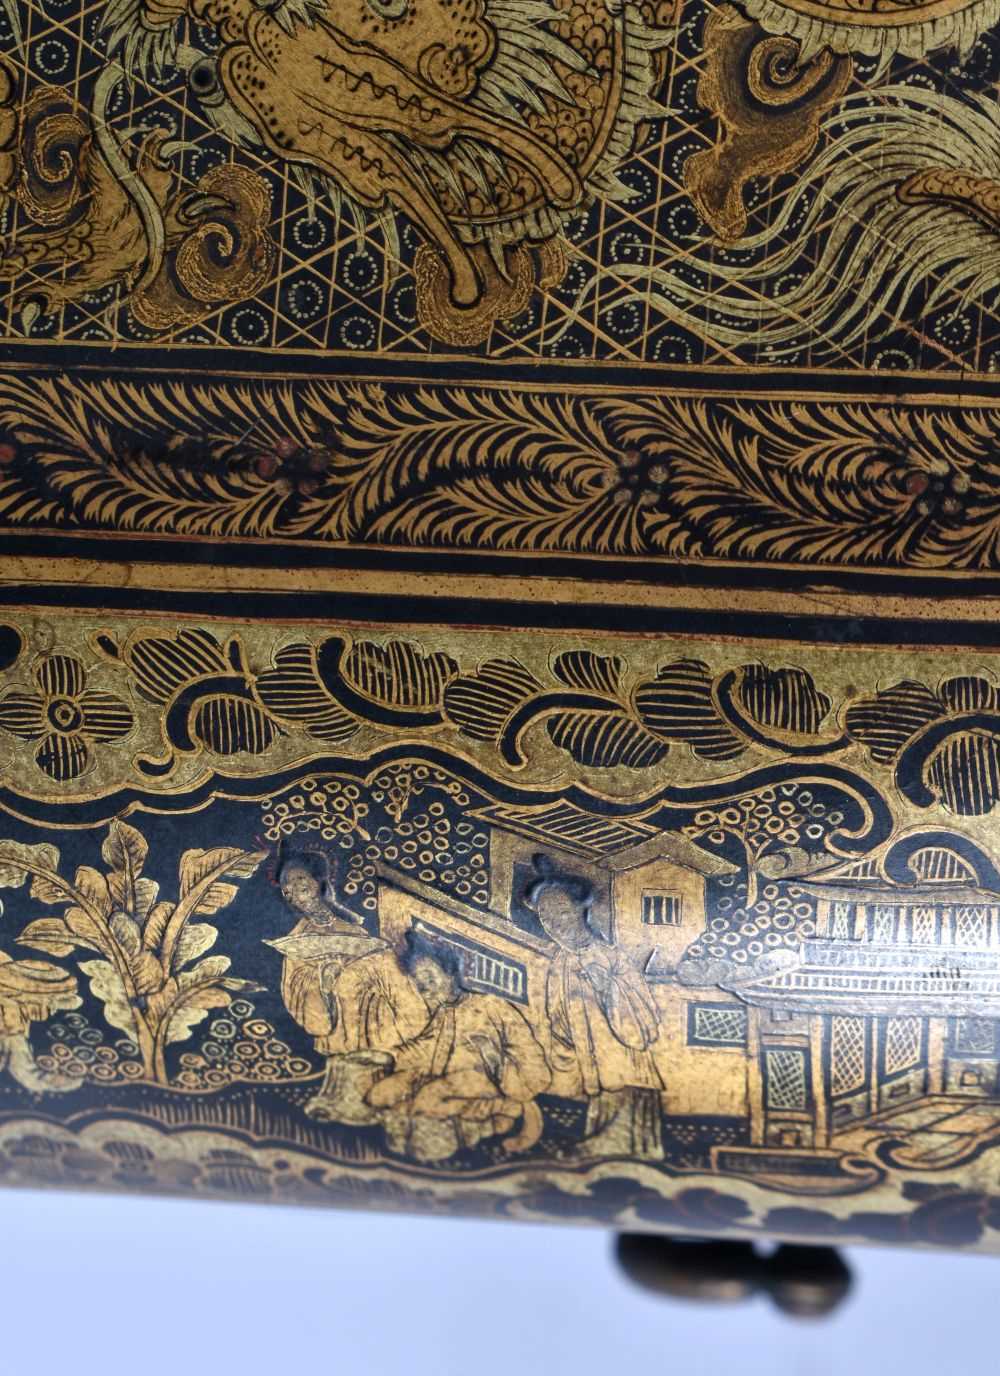 A FINE LATE 18TH/19TH CENTURY CHINESE EXPORT BLACK AND GOLD LACQUER SEWING CASKET Mid Qing, - Image 12 of 13